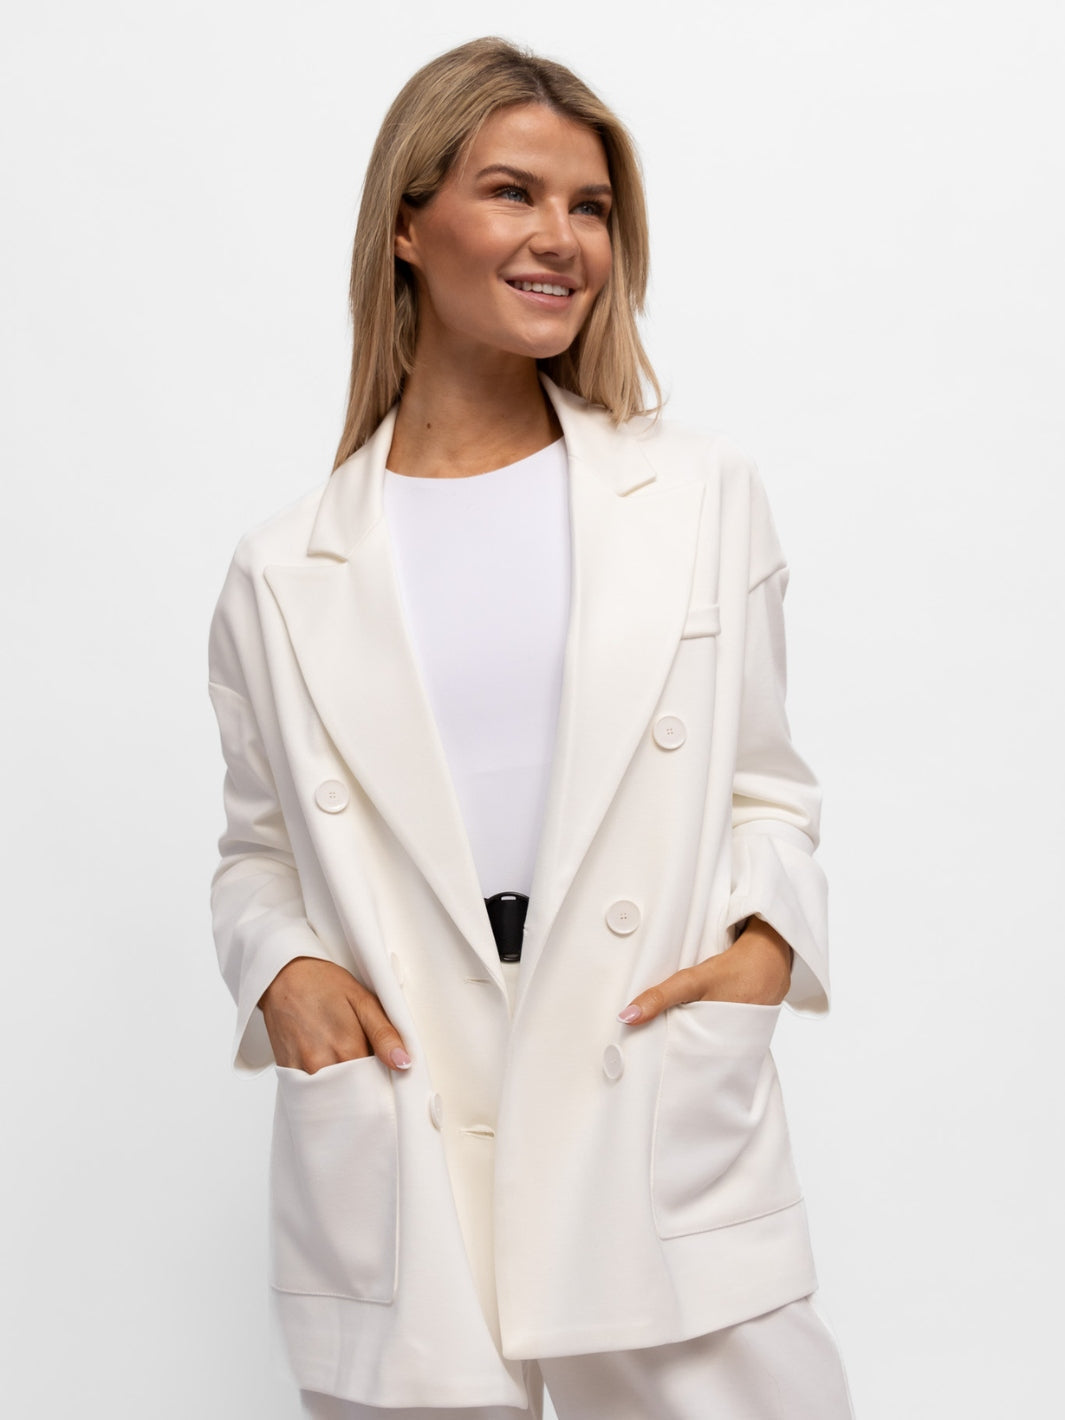 Italian Collection Jacket The Italian Collection Travel Jacket in White